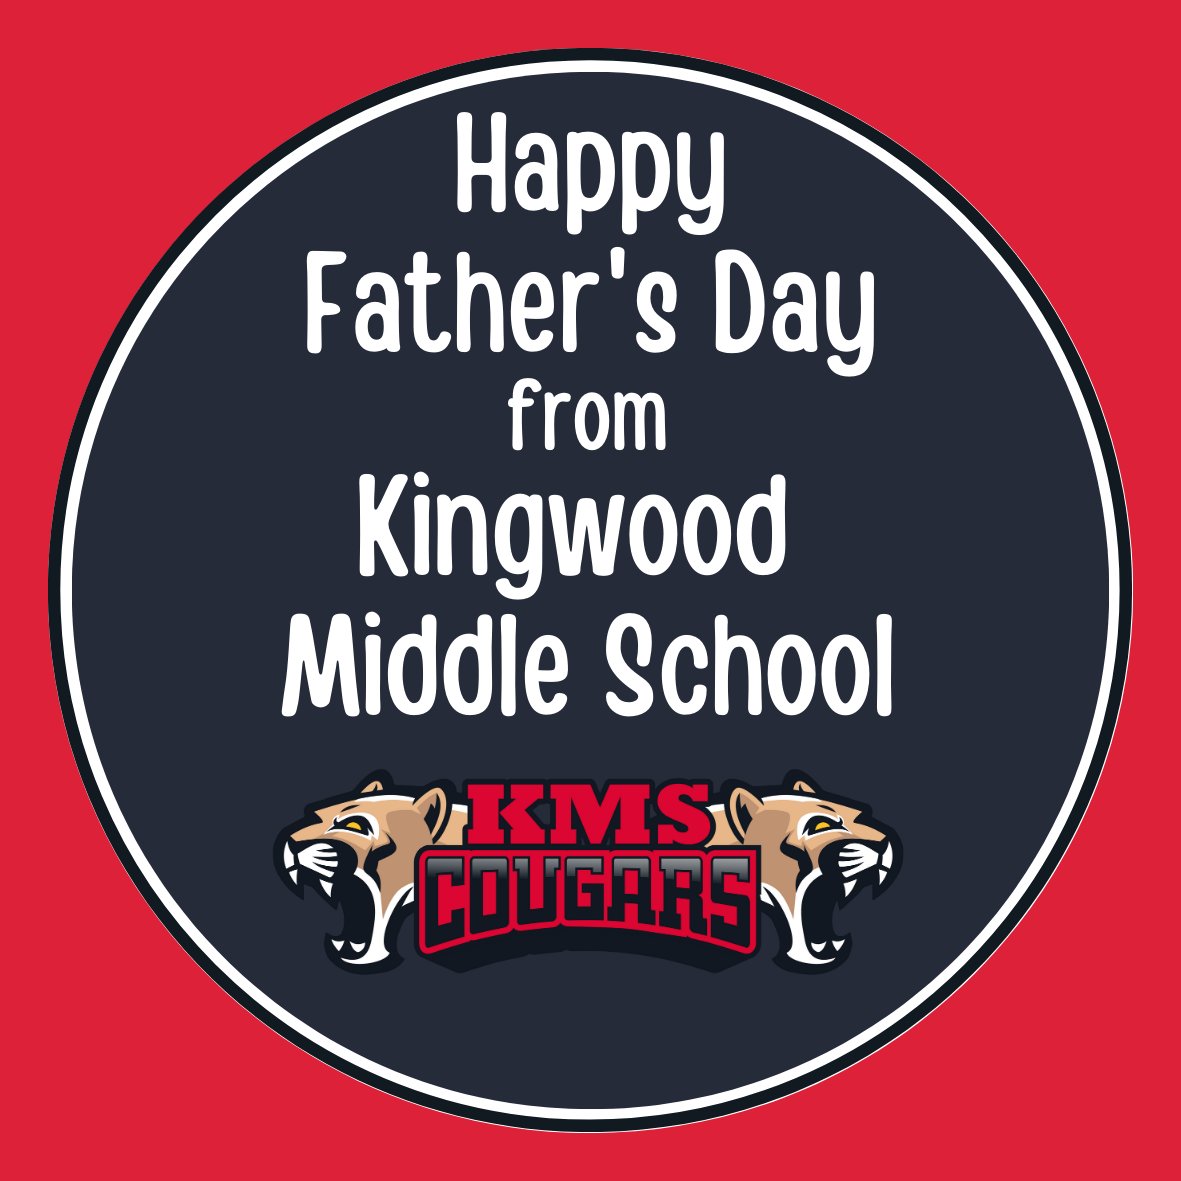 The Cougars wish a very Happy Father's Day to all of our KMS dads! #KMSCougarPride🐾